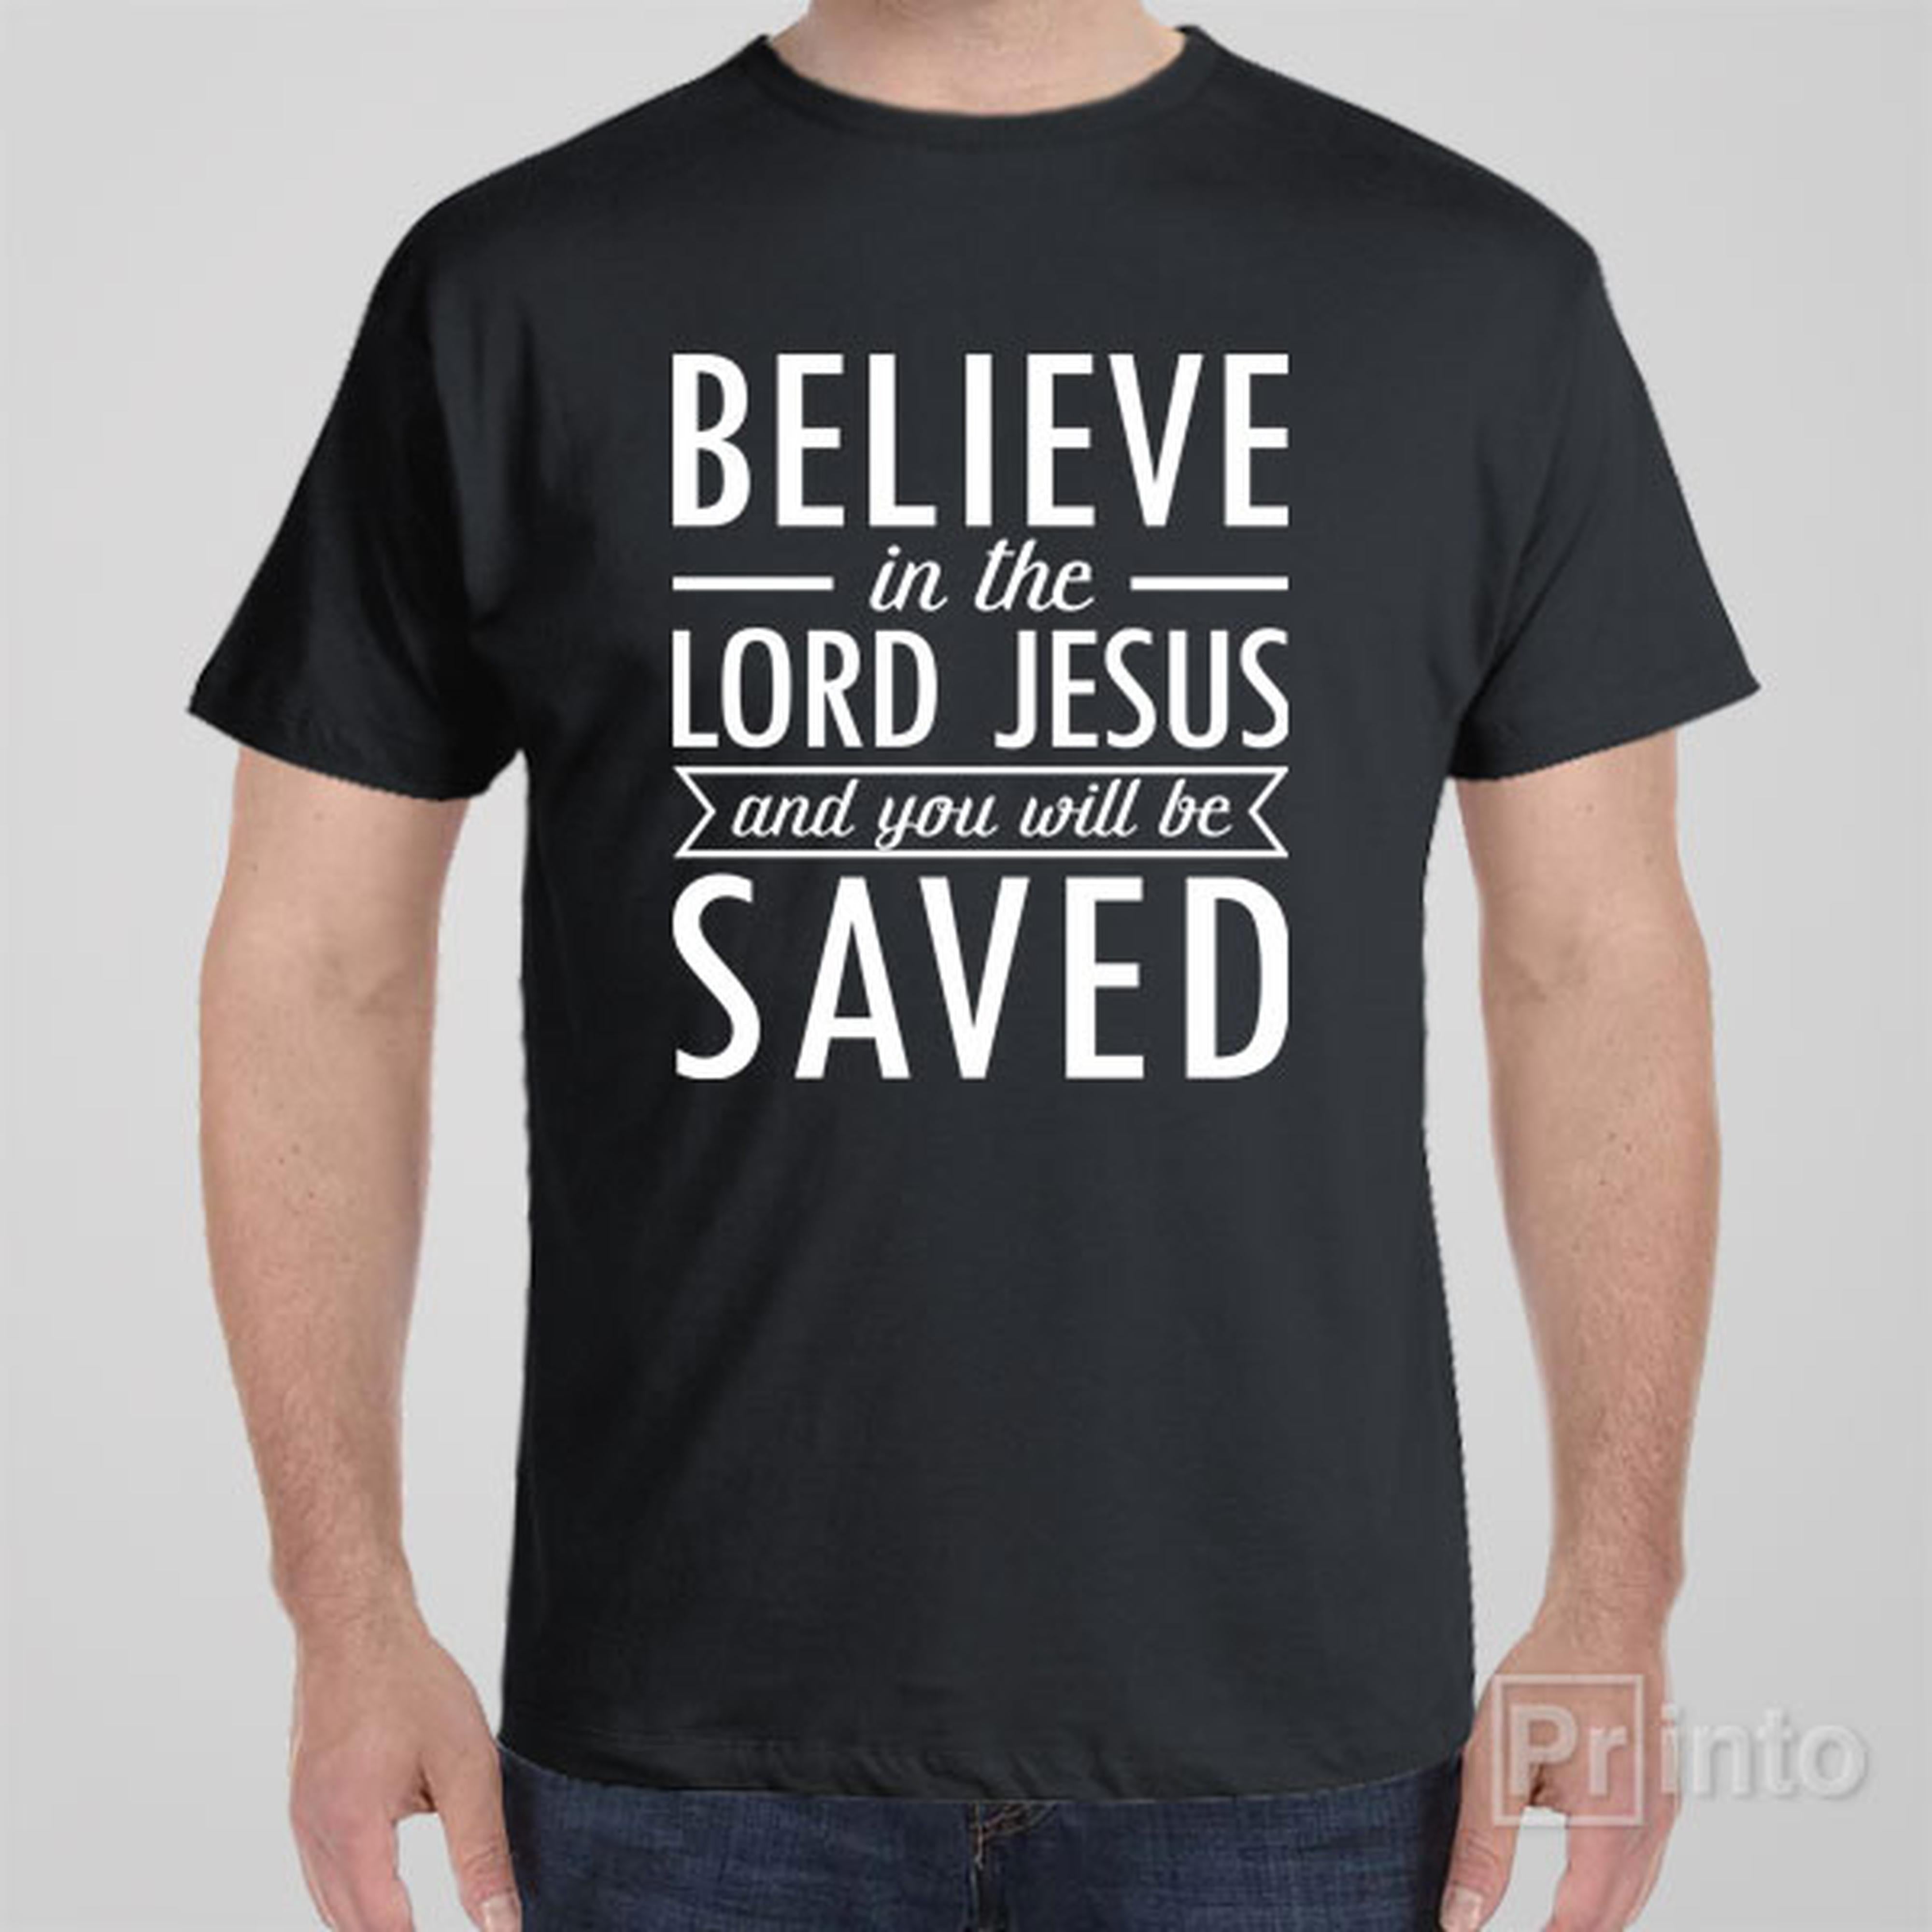 believe-in-the-lord-jesus-t-shirt